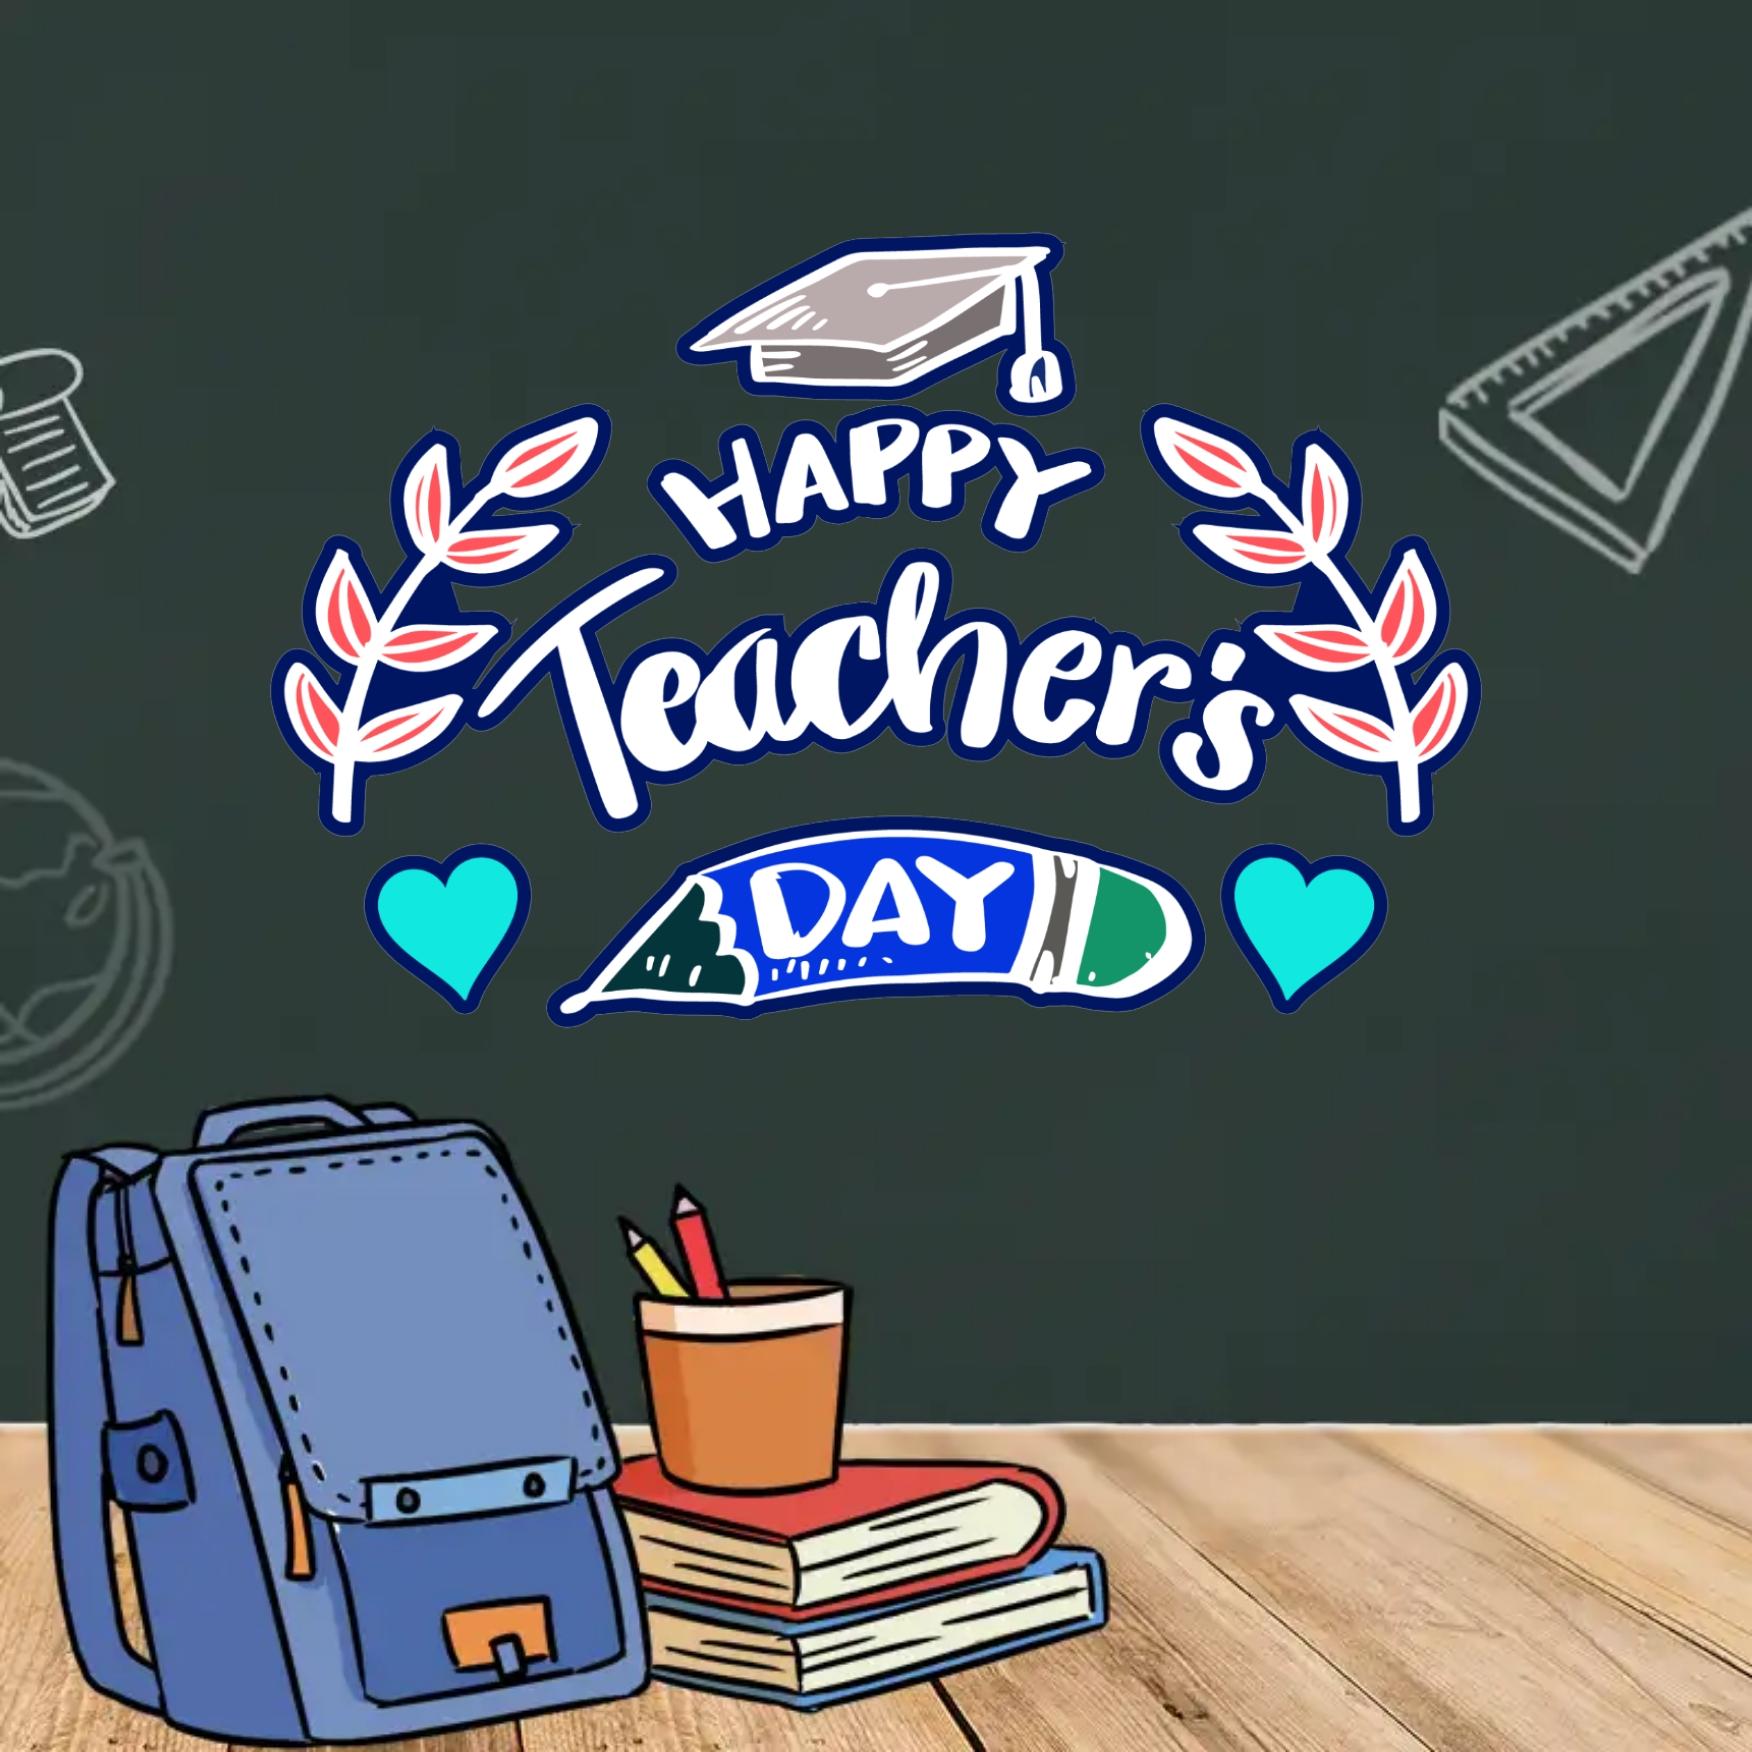 Happy Teachers Day Hd Images